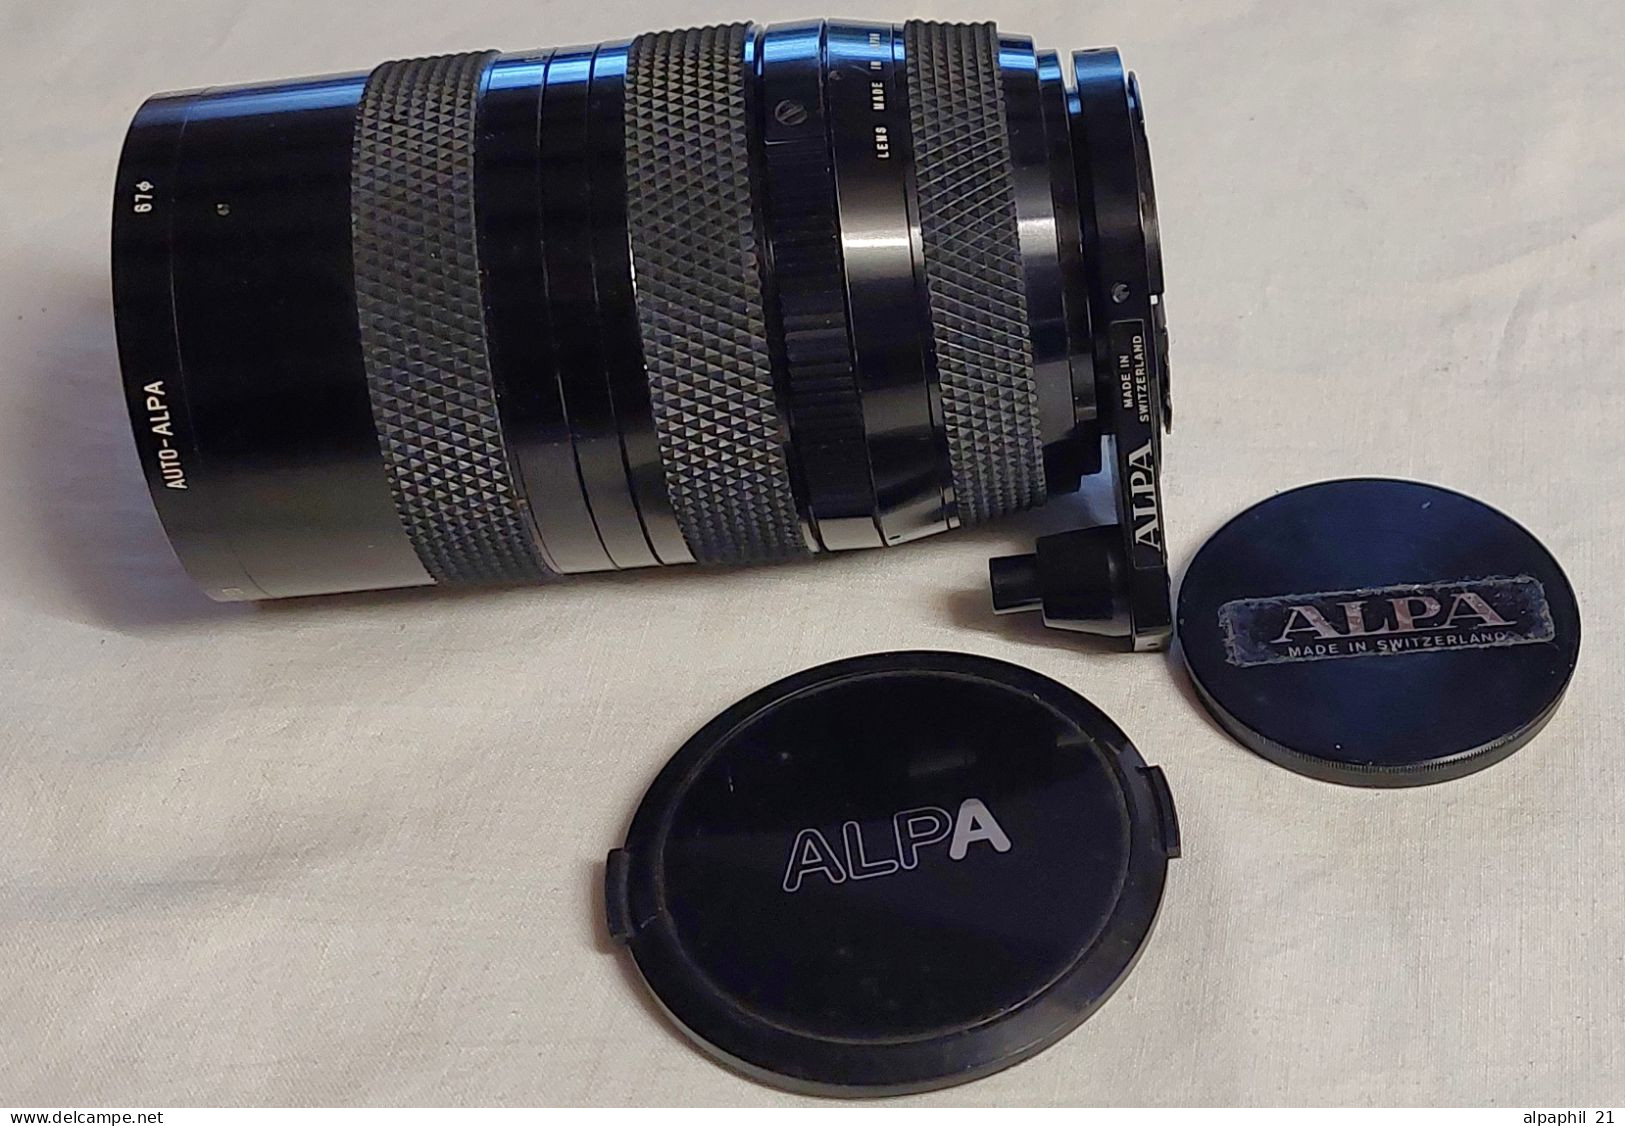 Auto-Alpa Zoom Lens Ø 42 Mm 1:3.5/40~105 With AUTOBAG - Supplies And Equipment